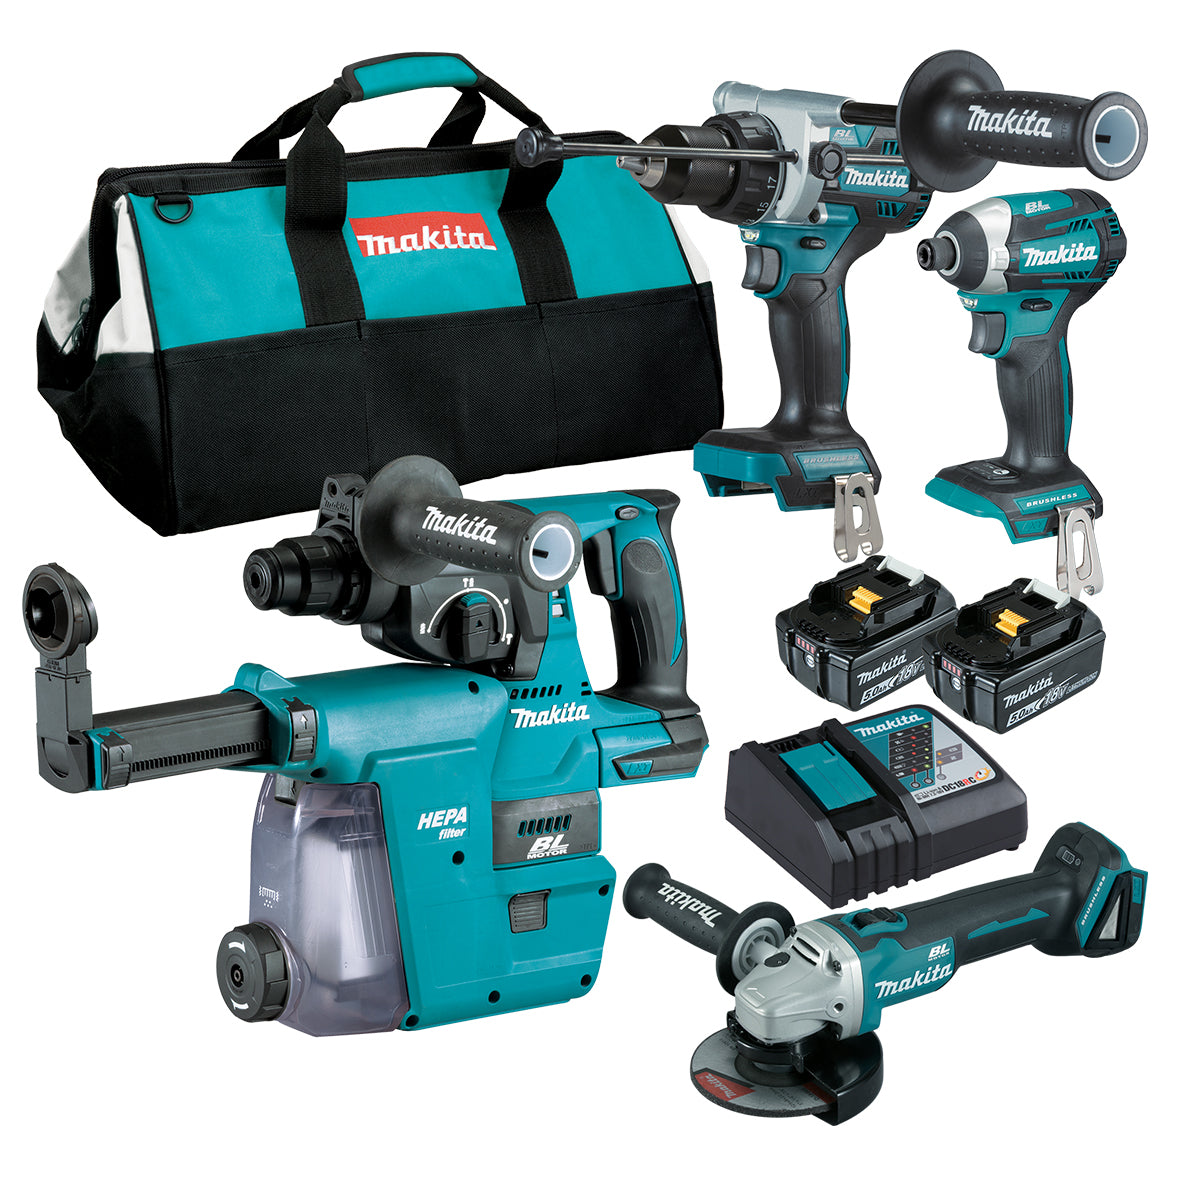 18V Brushless 4-Piece Combo Kit DLX4148TX1 by Makita